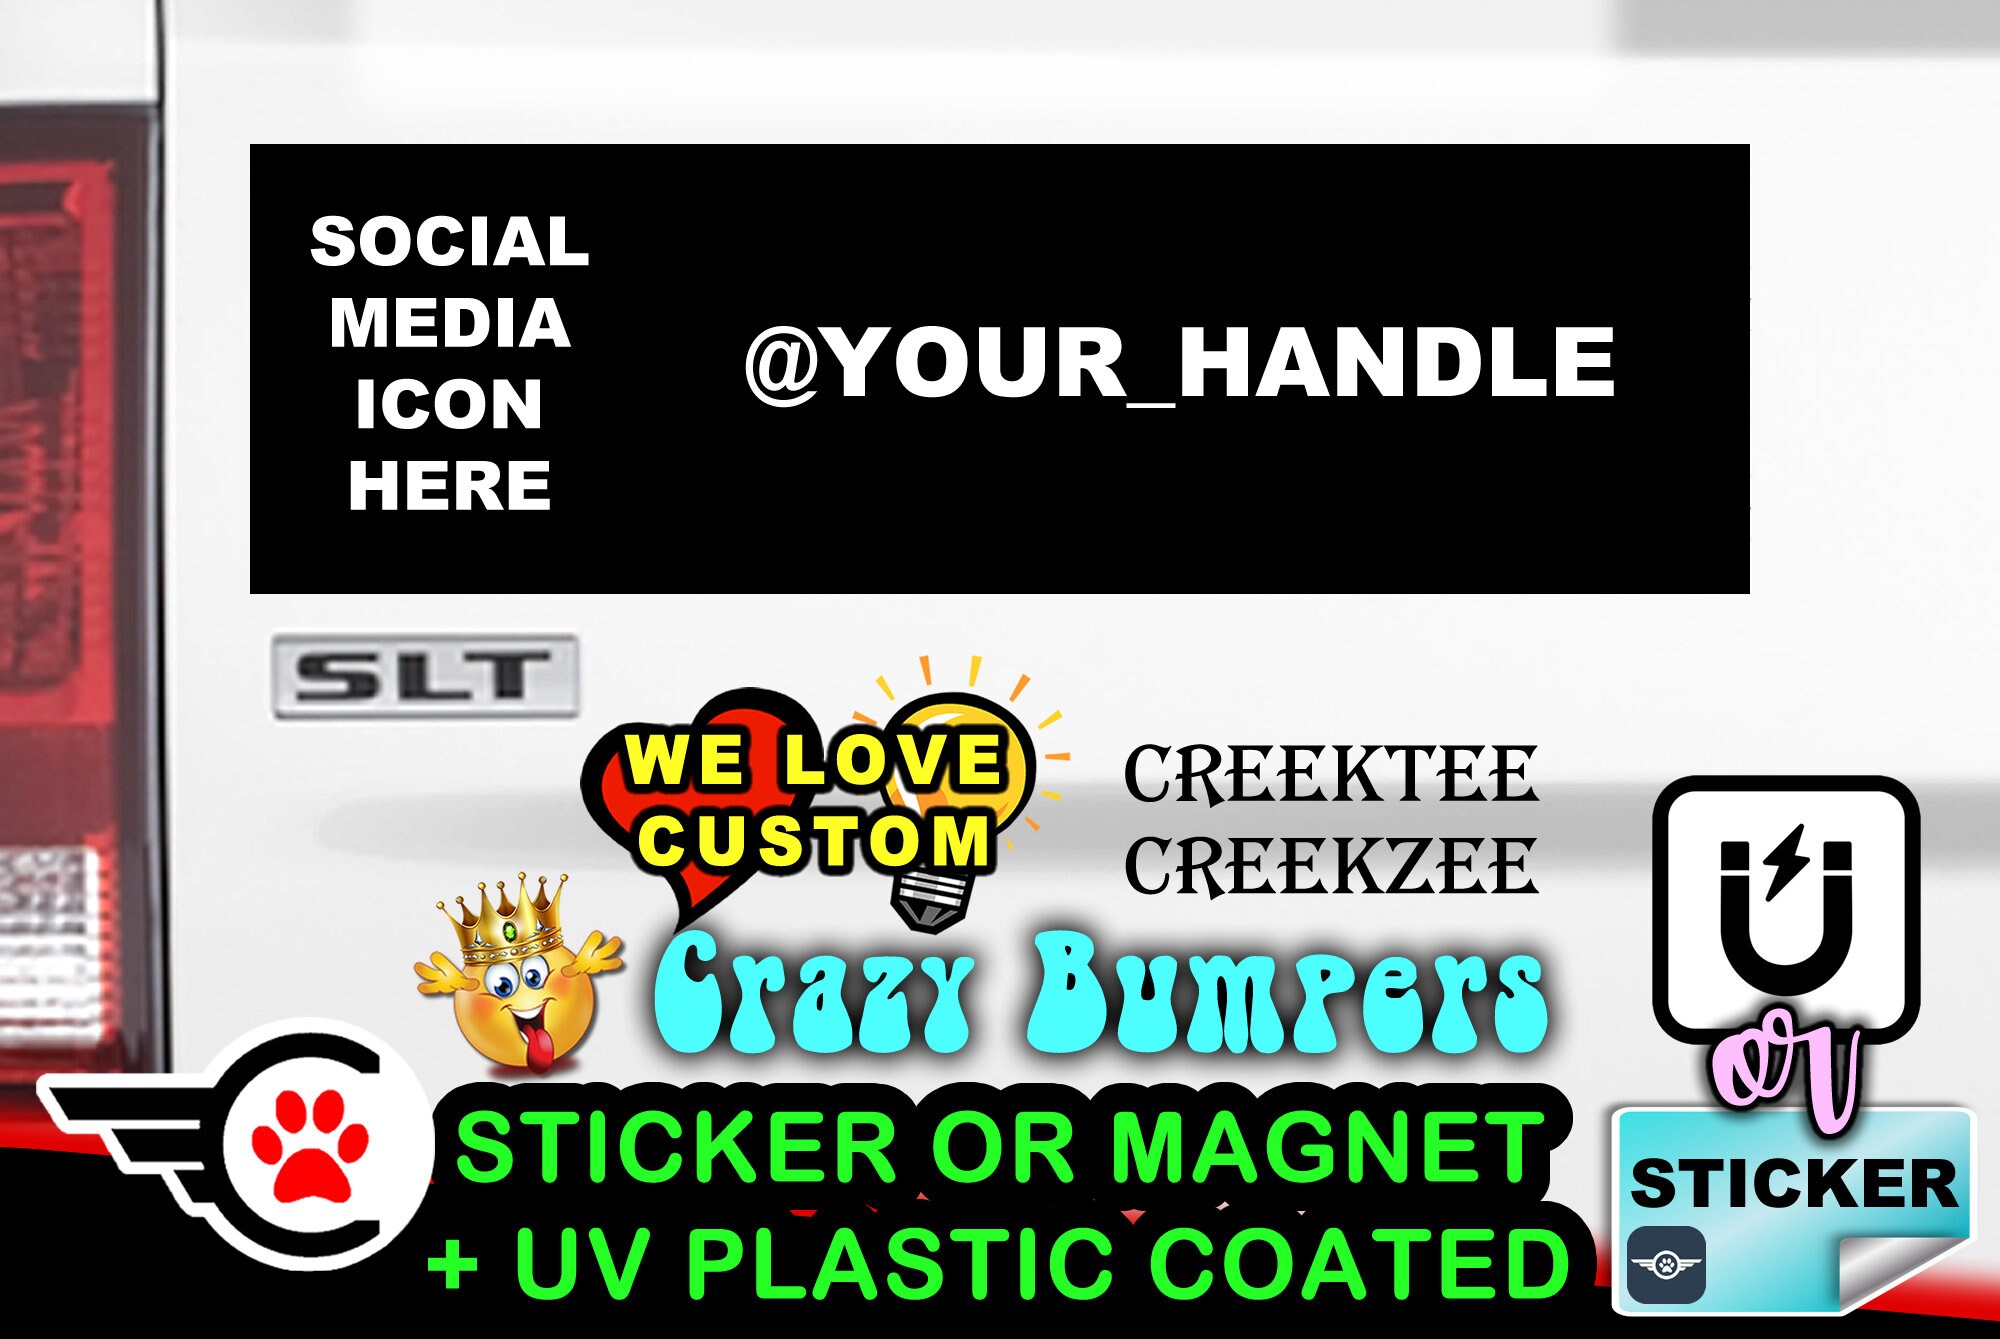 Social Media Icon and Your Handle Funny Bumper Sticker or Magnet in various sizes Hiqh Quality UV Laminate Coating